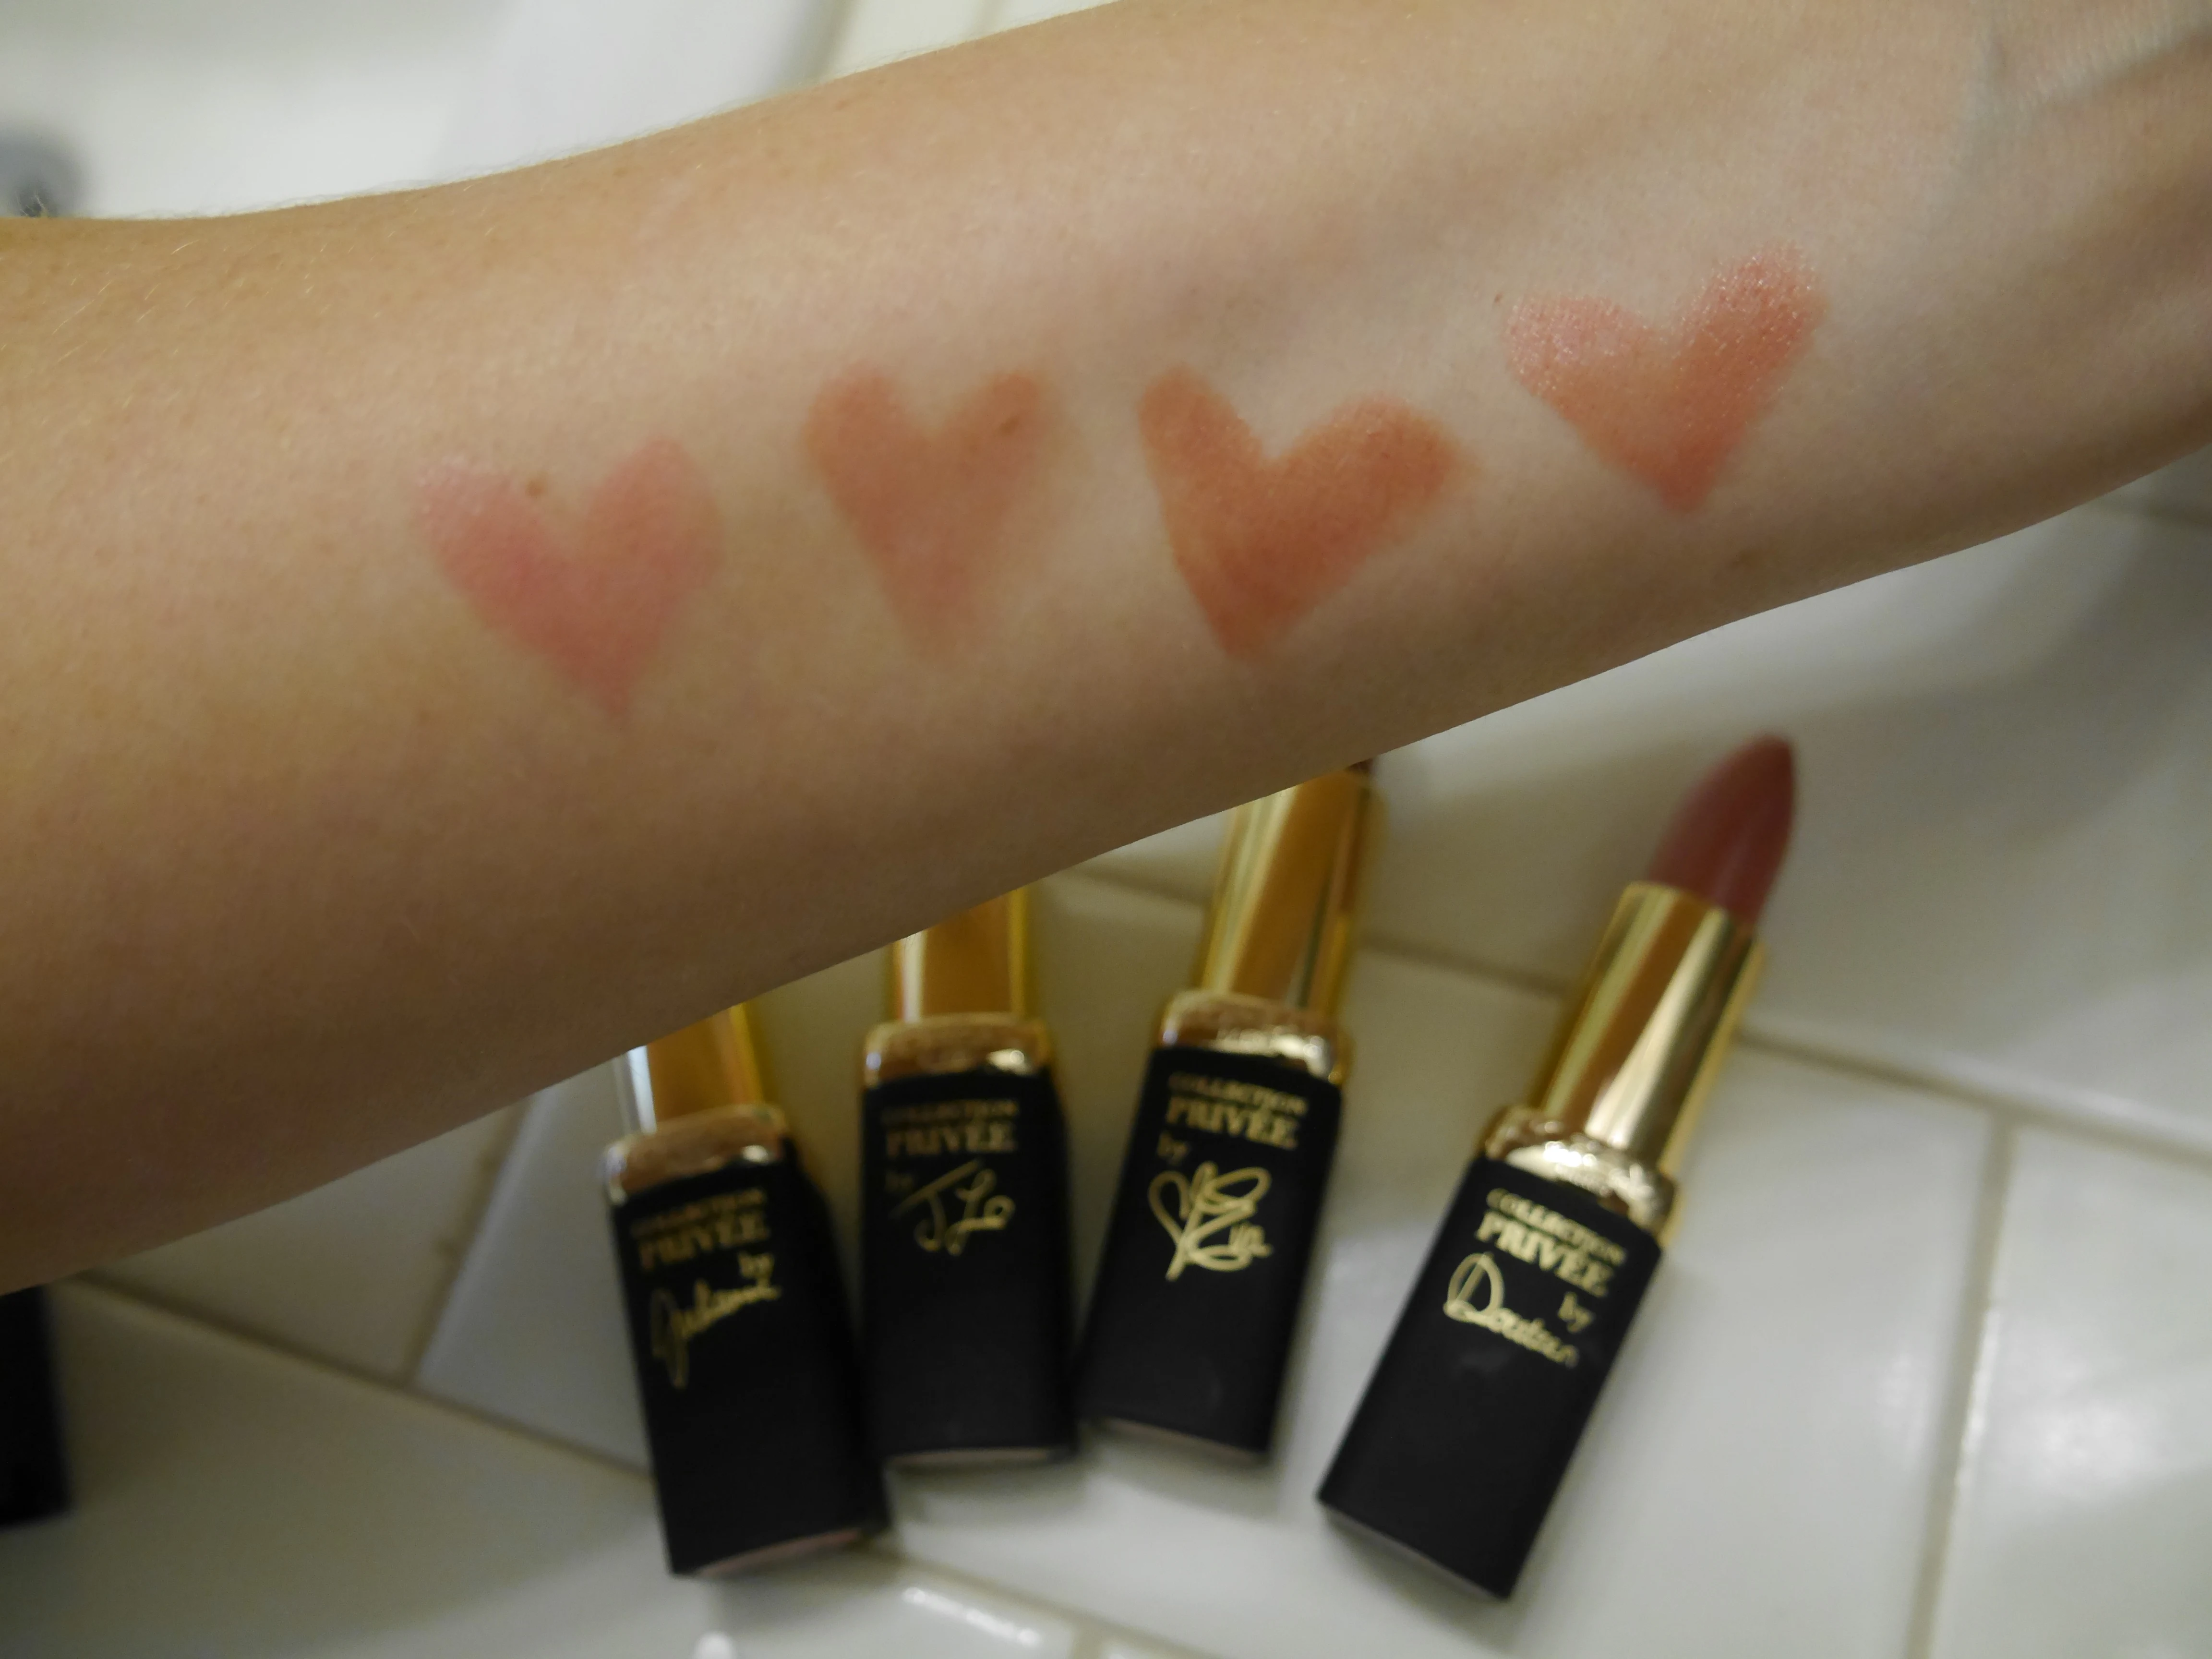 loreal-collection-privee-nude-lipsticks-nail-polish-review-swatches-2014.jpeg